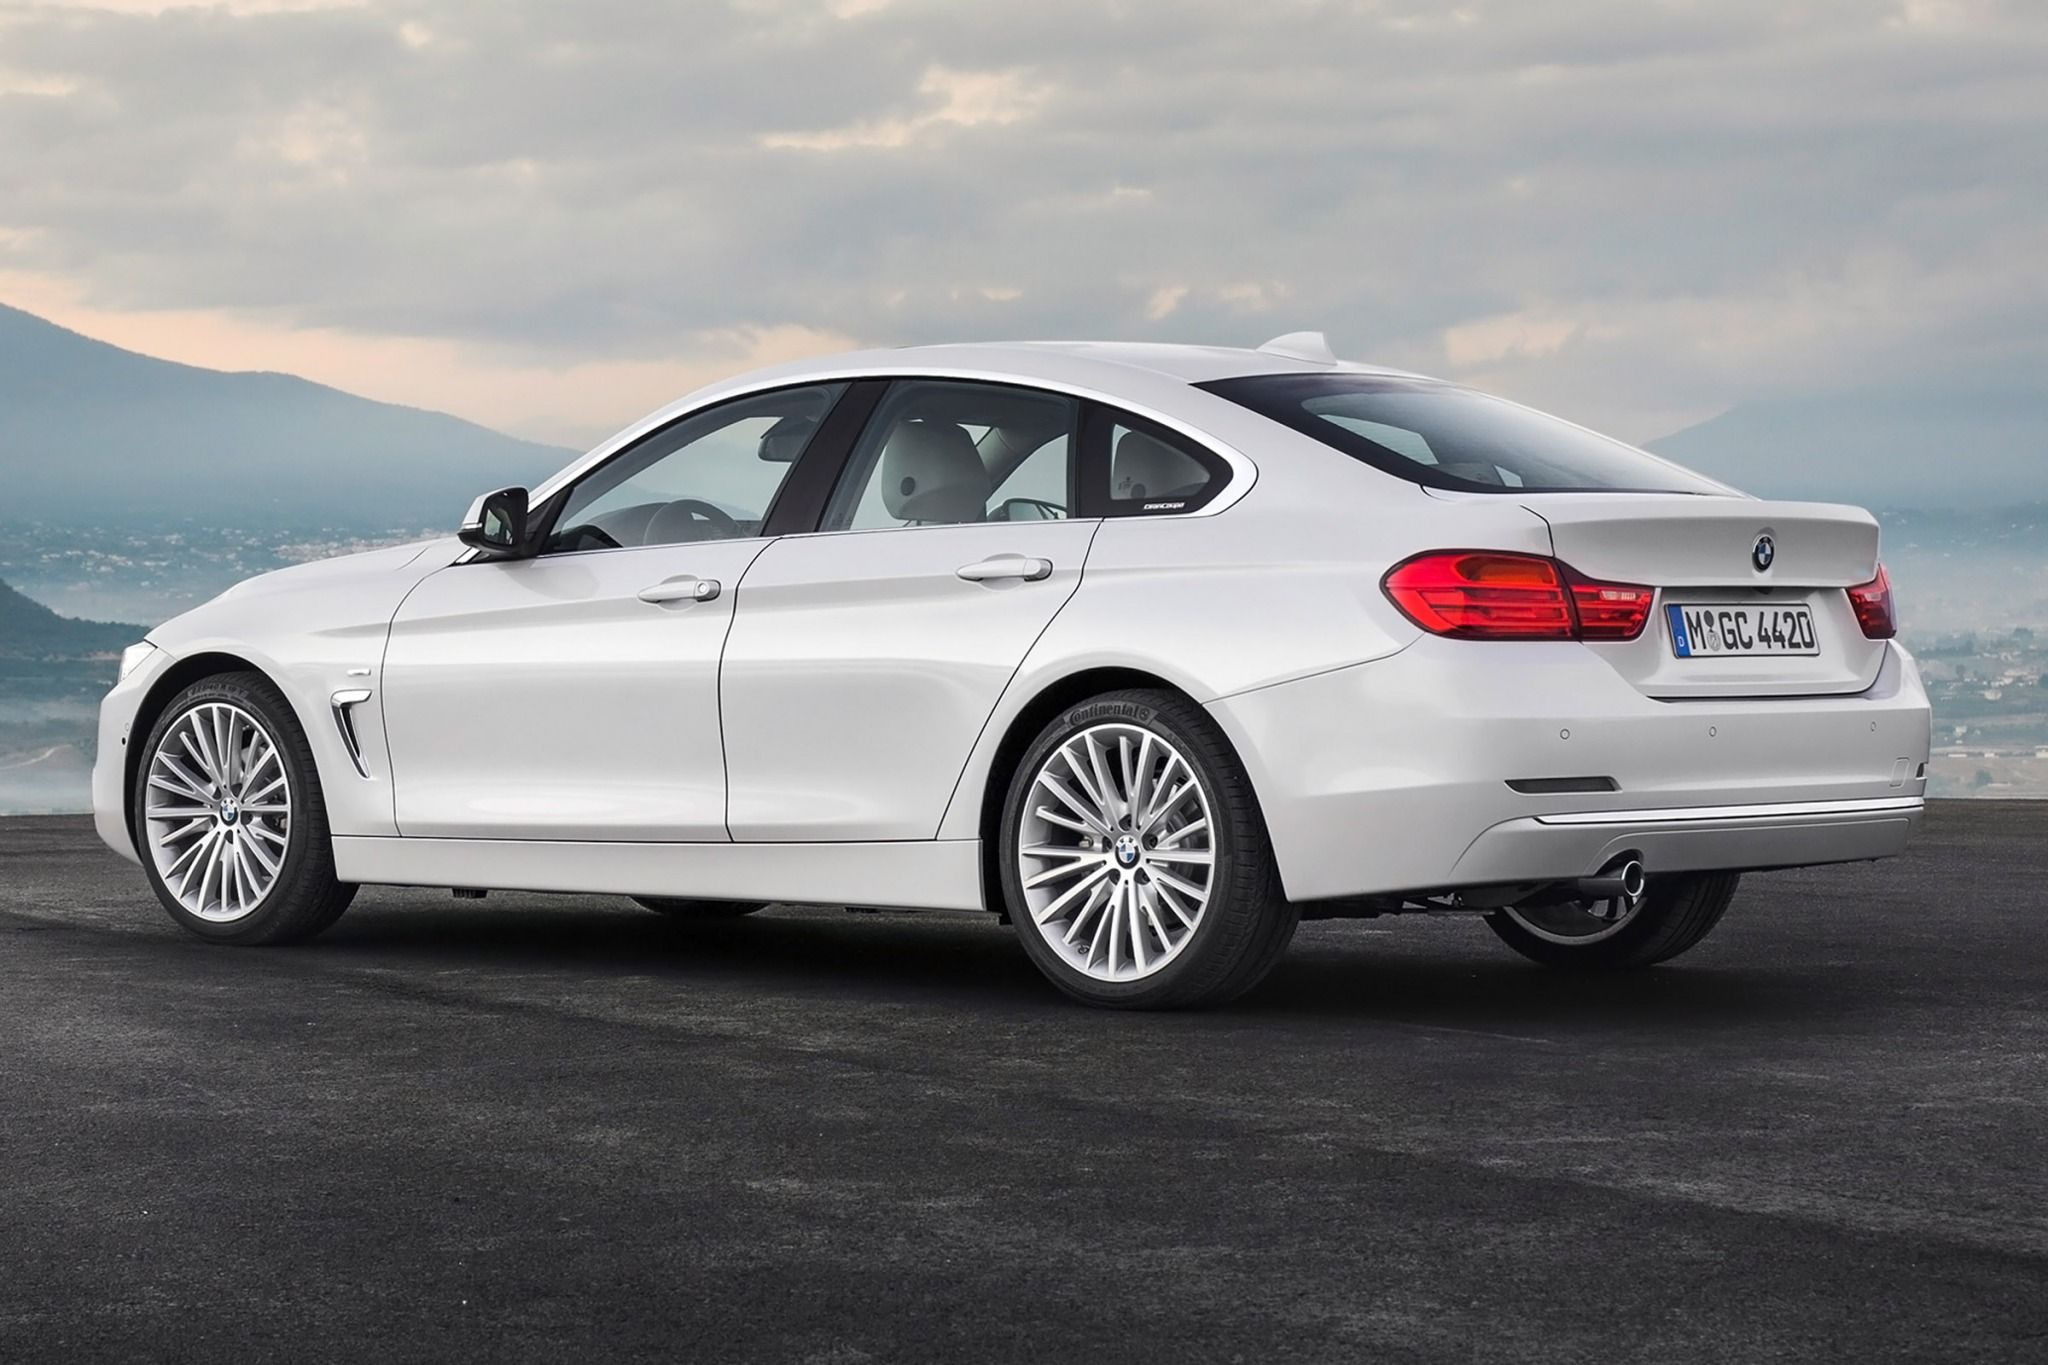 2015 Bmw 4 Series Gran Coupe White Side Rear View (View 4 of 11)